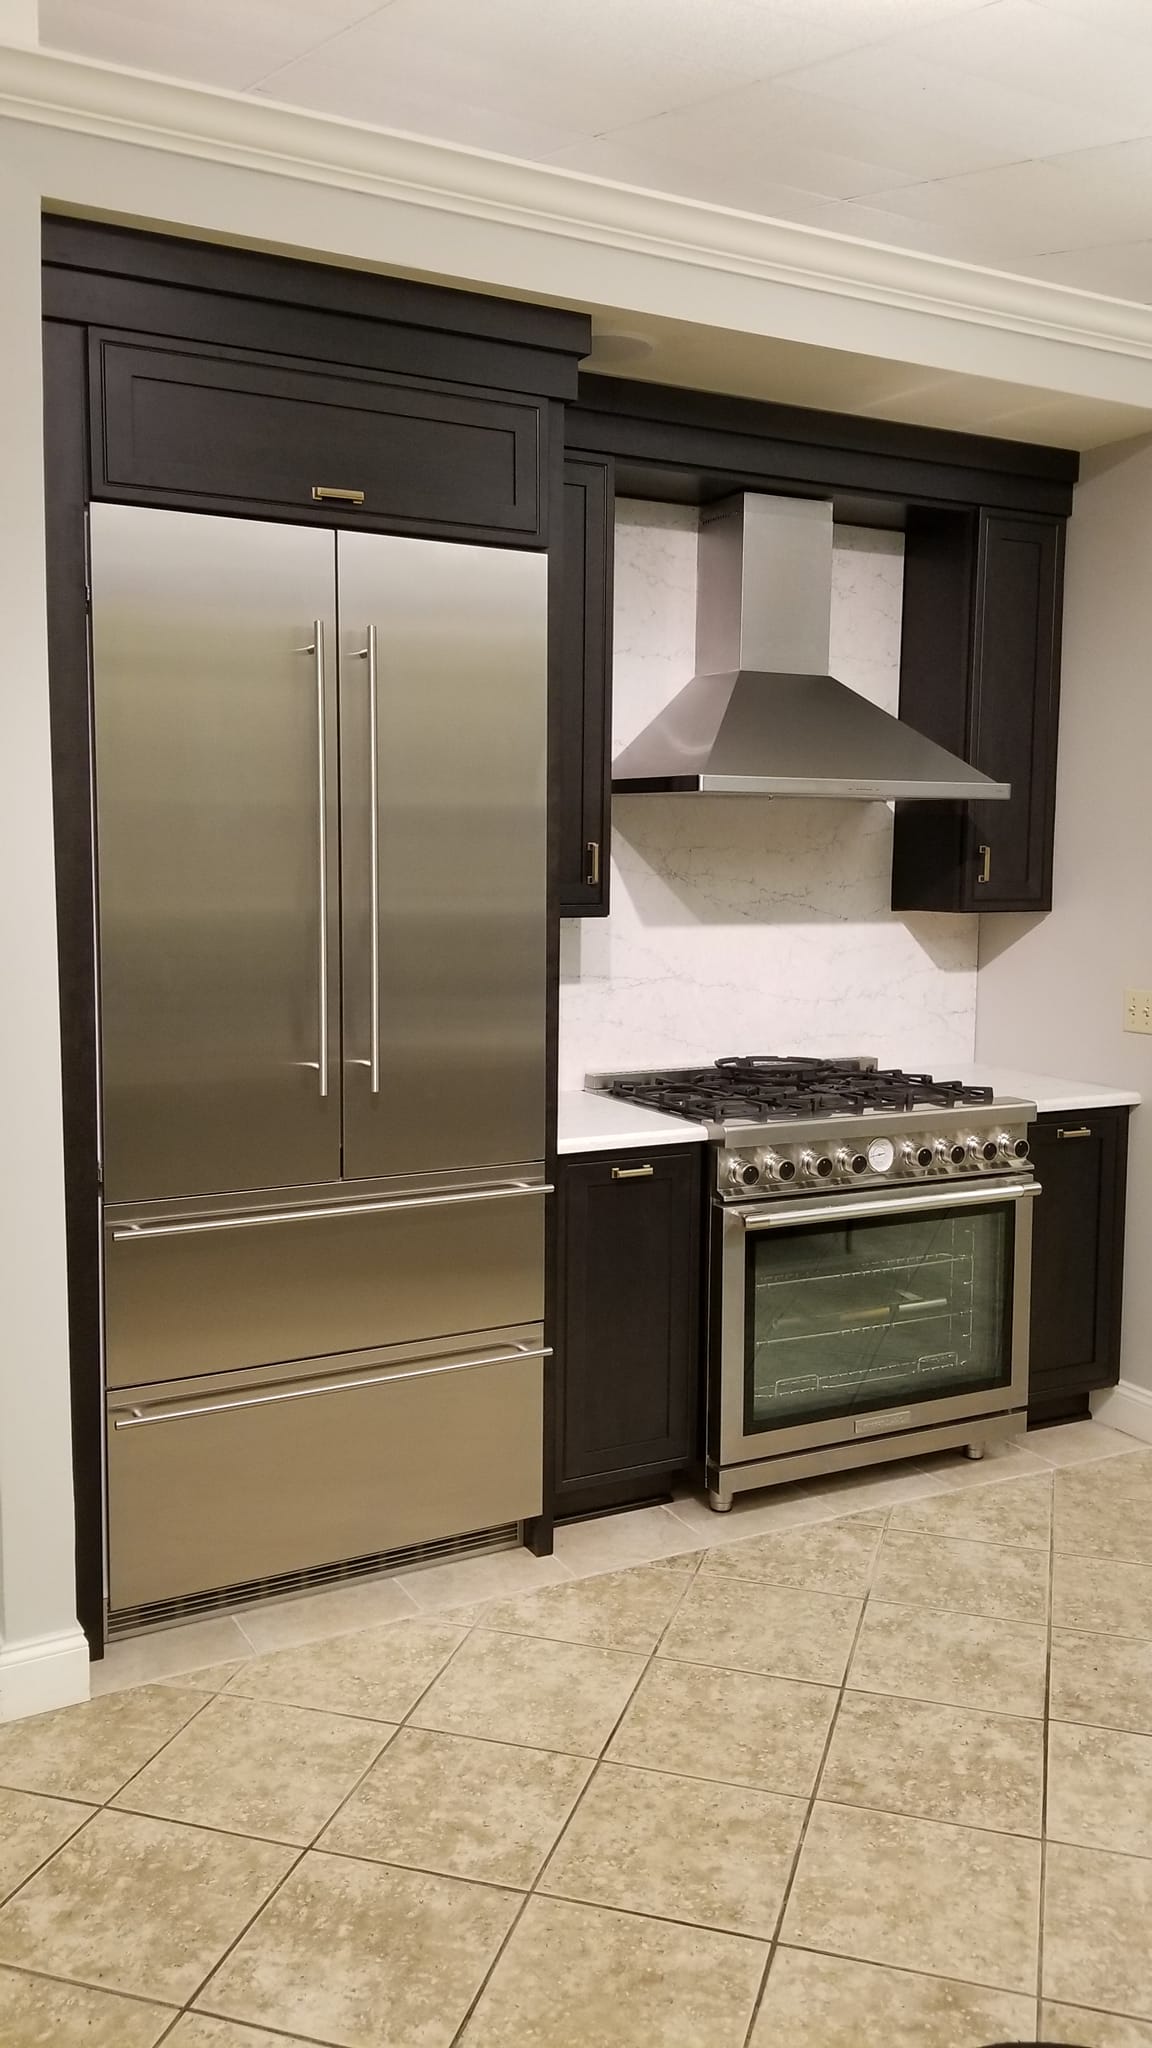 Liebherr Refrigerator, Zephyr Hood and Superiore Range with dark cabinets and white countertop | Marchand Creative Kitchens Cabinets New Orleans Metairie Mandeville LA